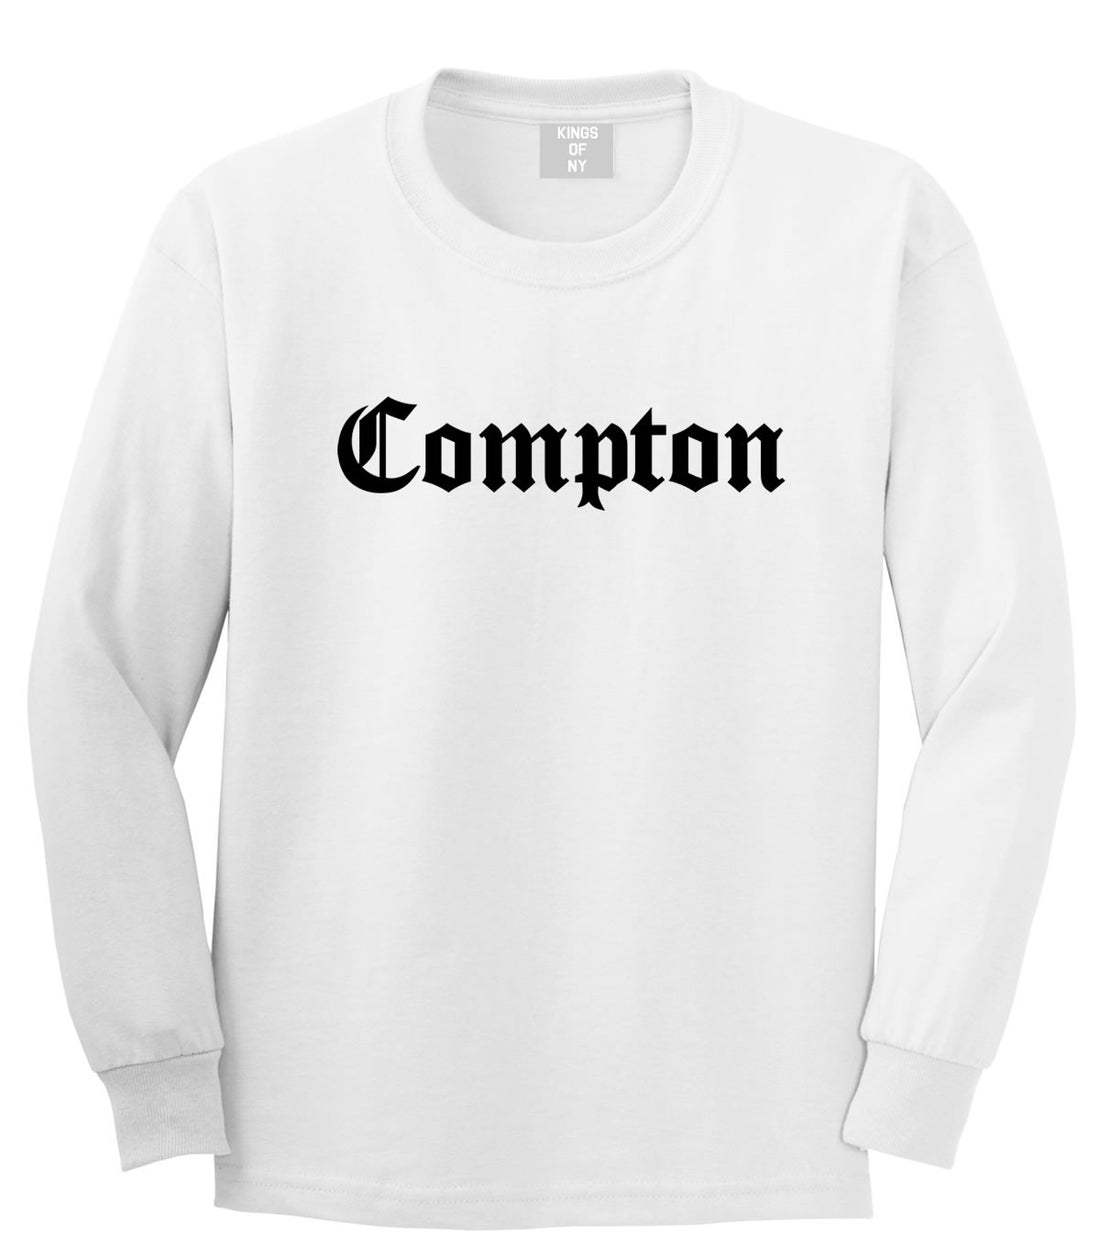 Kings Of NY Compton Long Sleeve T-Shirt in White